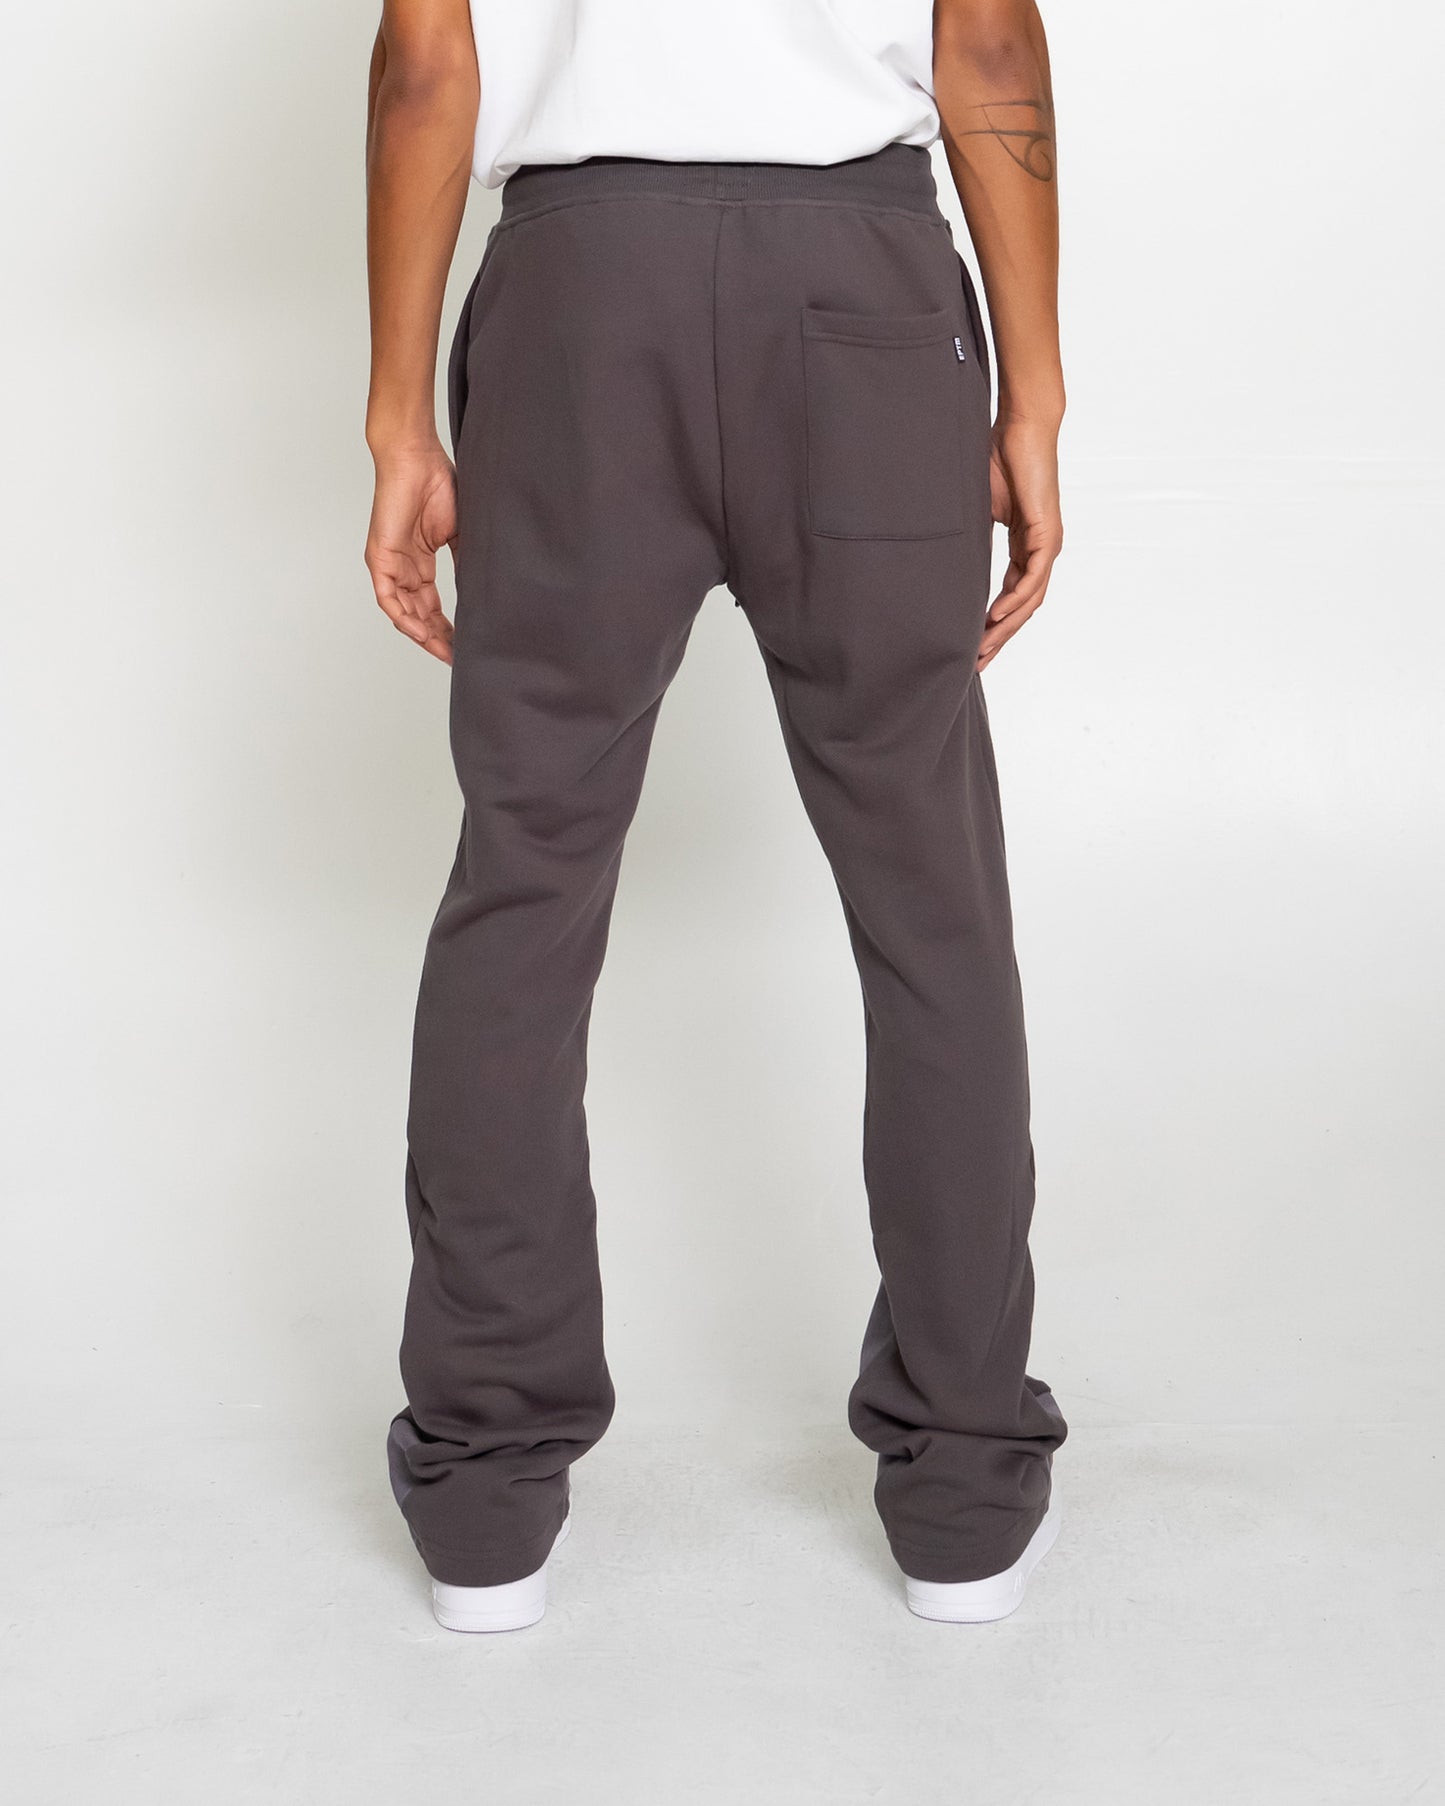 EPTM CLUBHOUSE PANTS - CHARCOAL